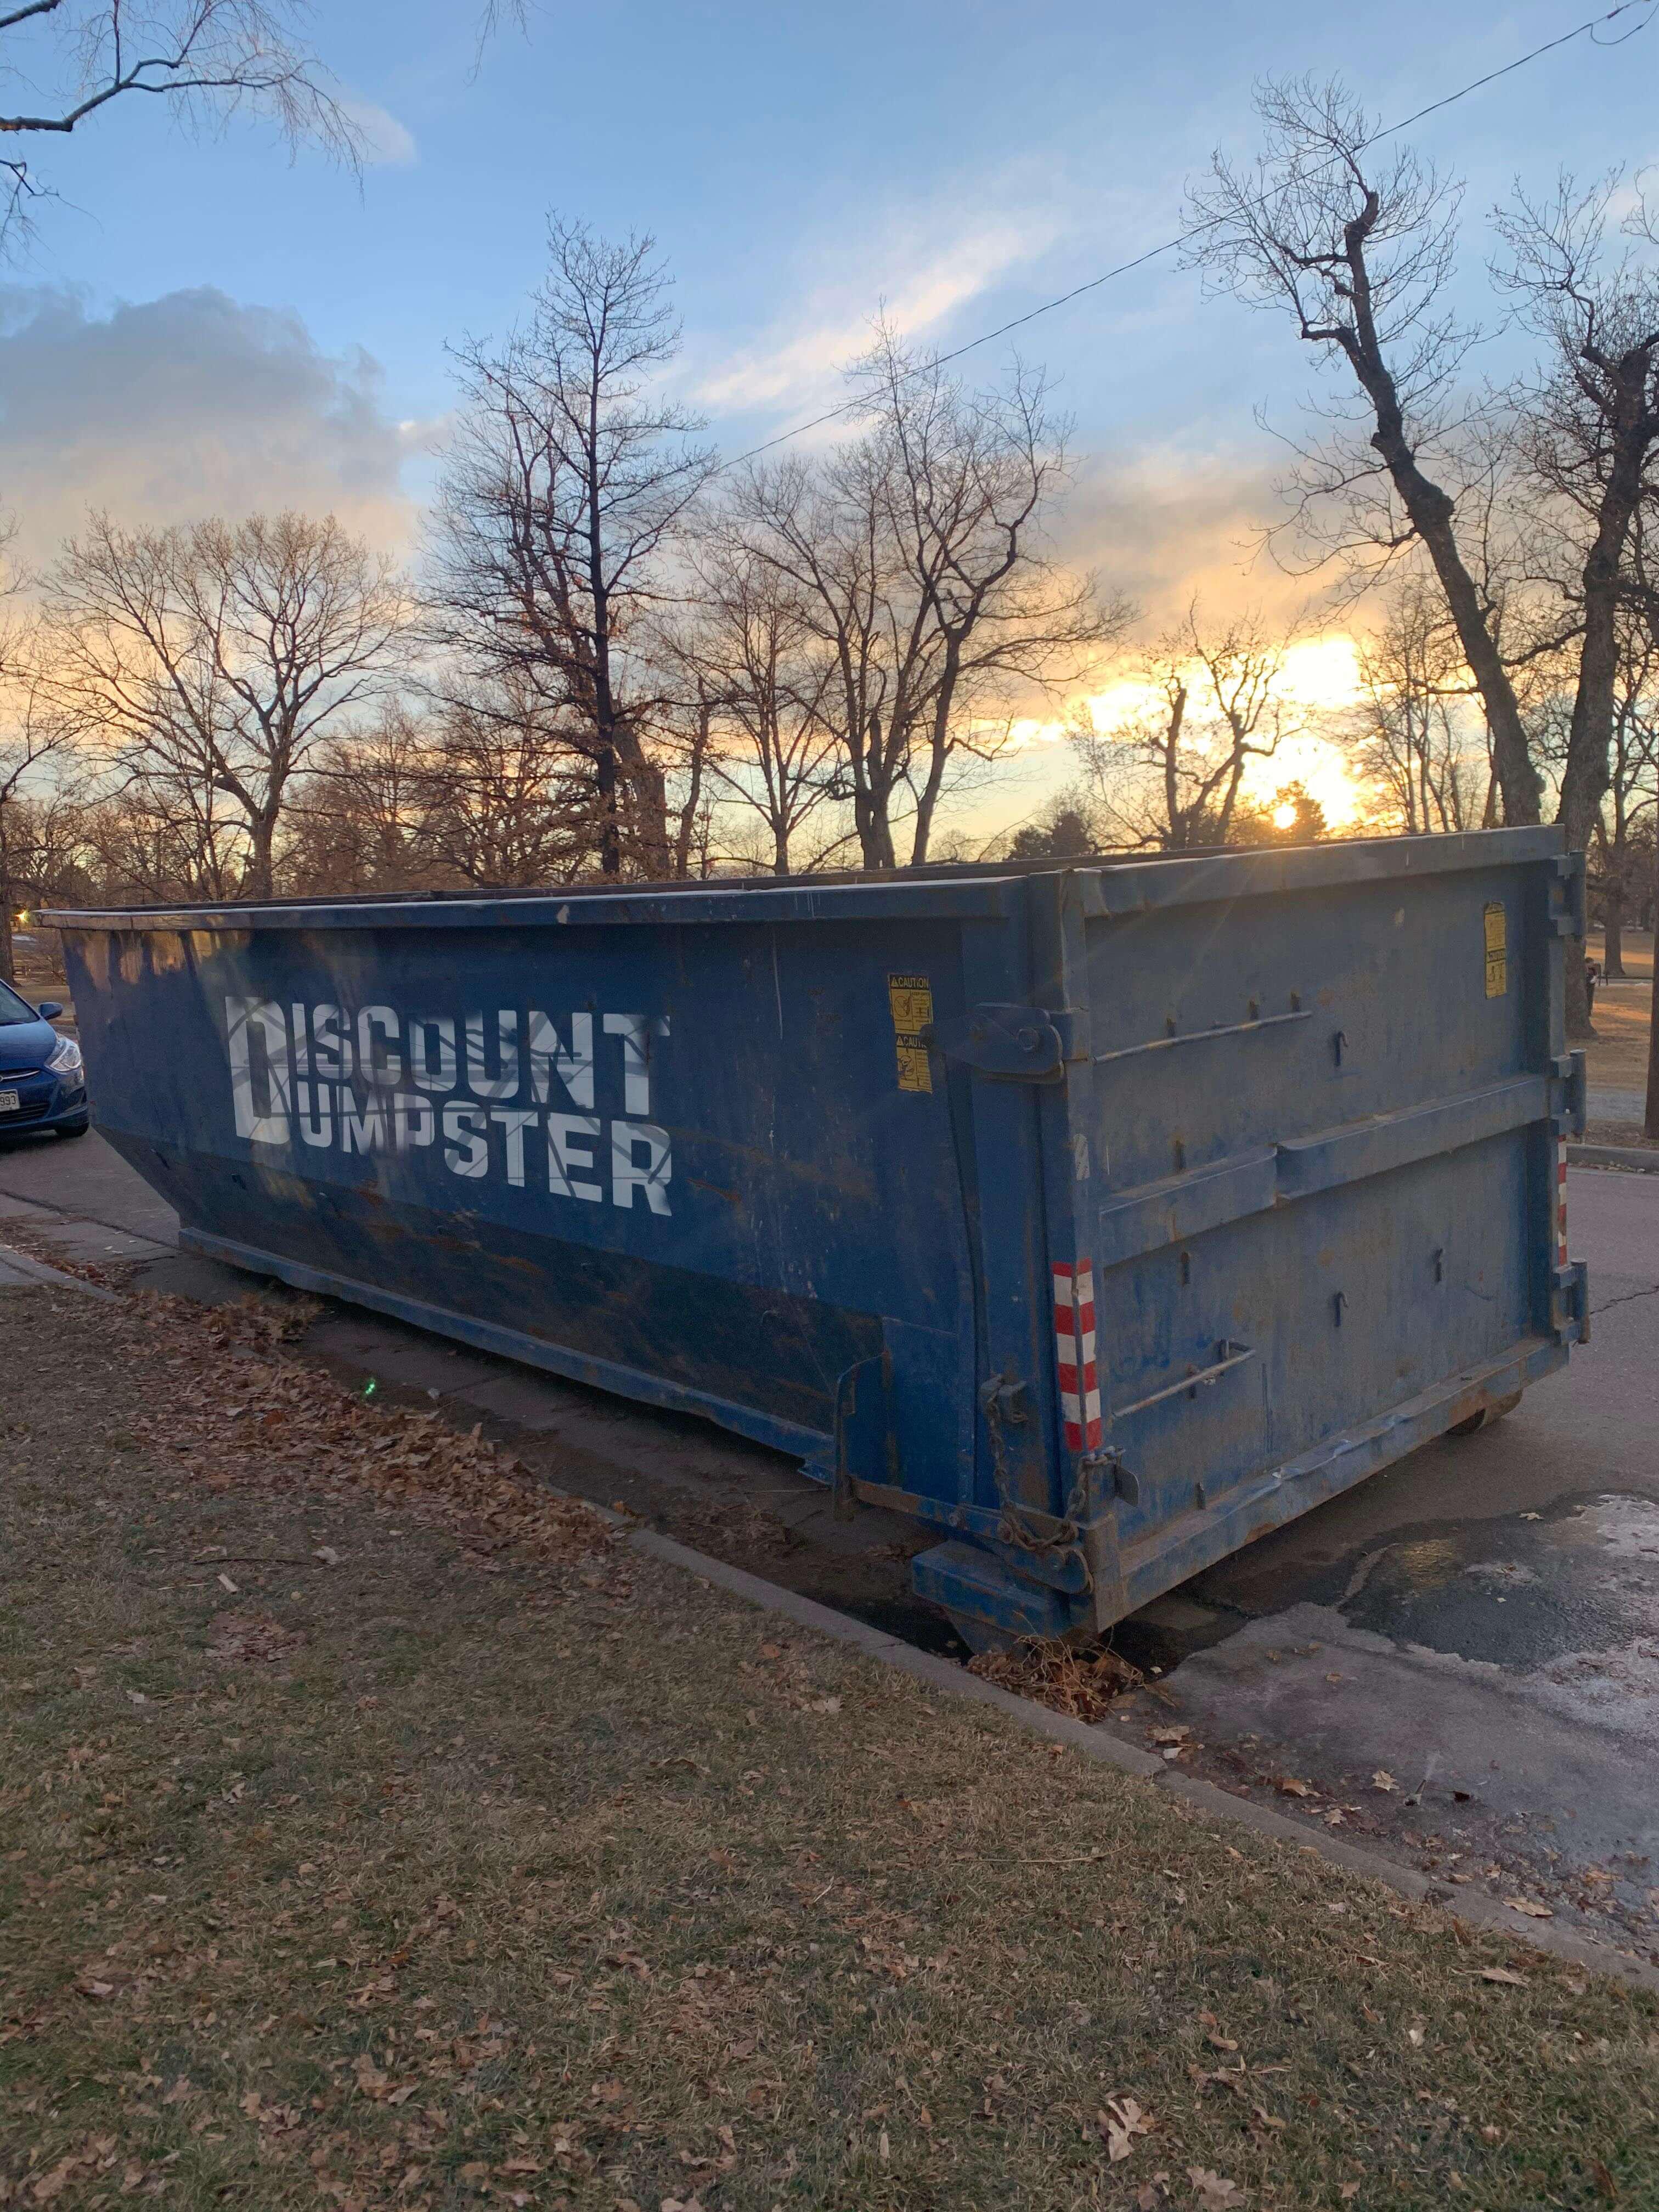 Discount dumpster has roll off dumpsters available for rent in Denver co